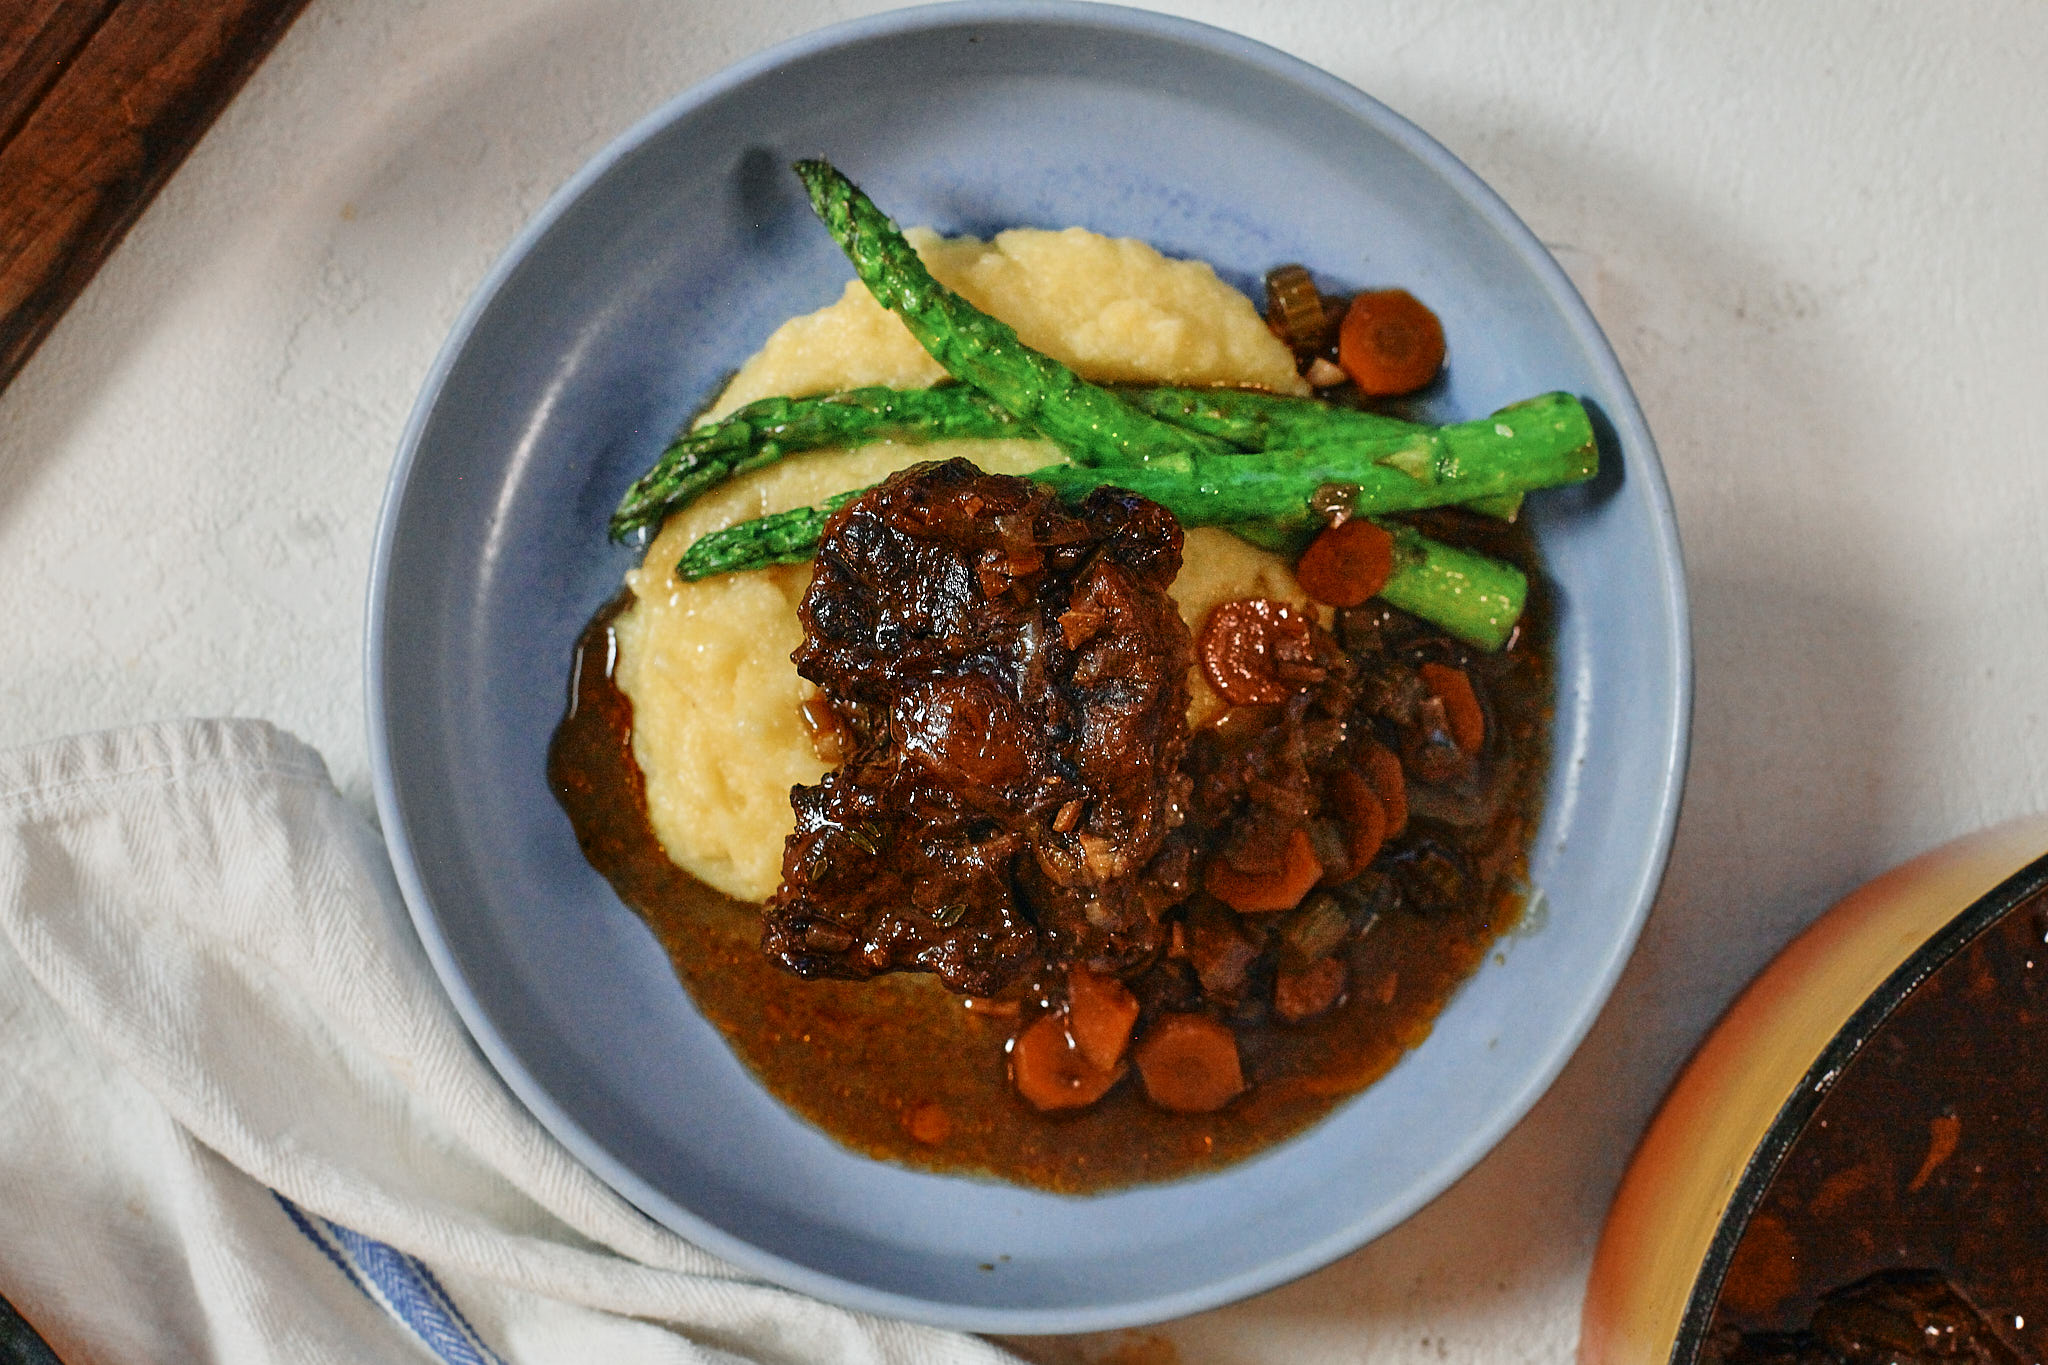 braised oxtail over polenta with asparagus